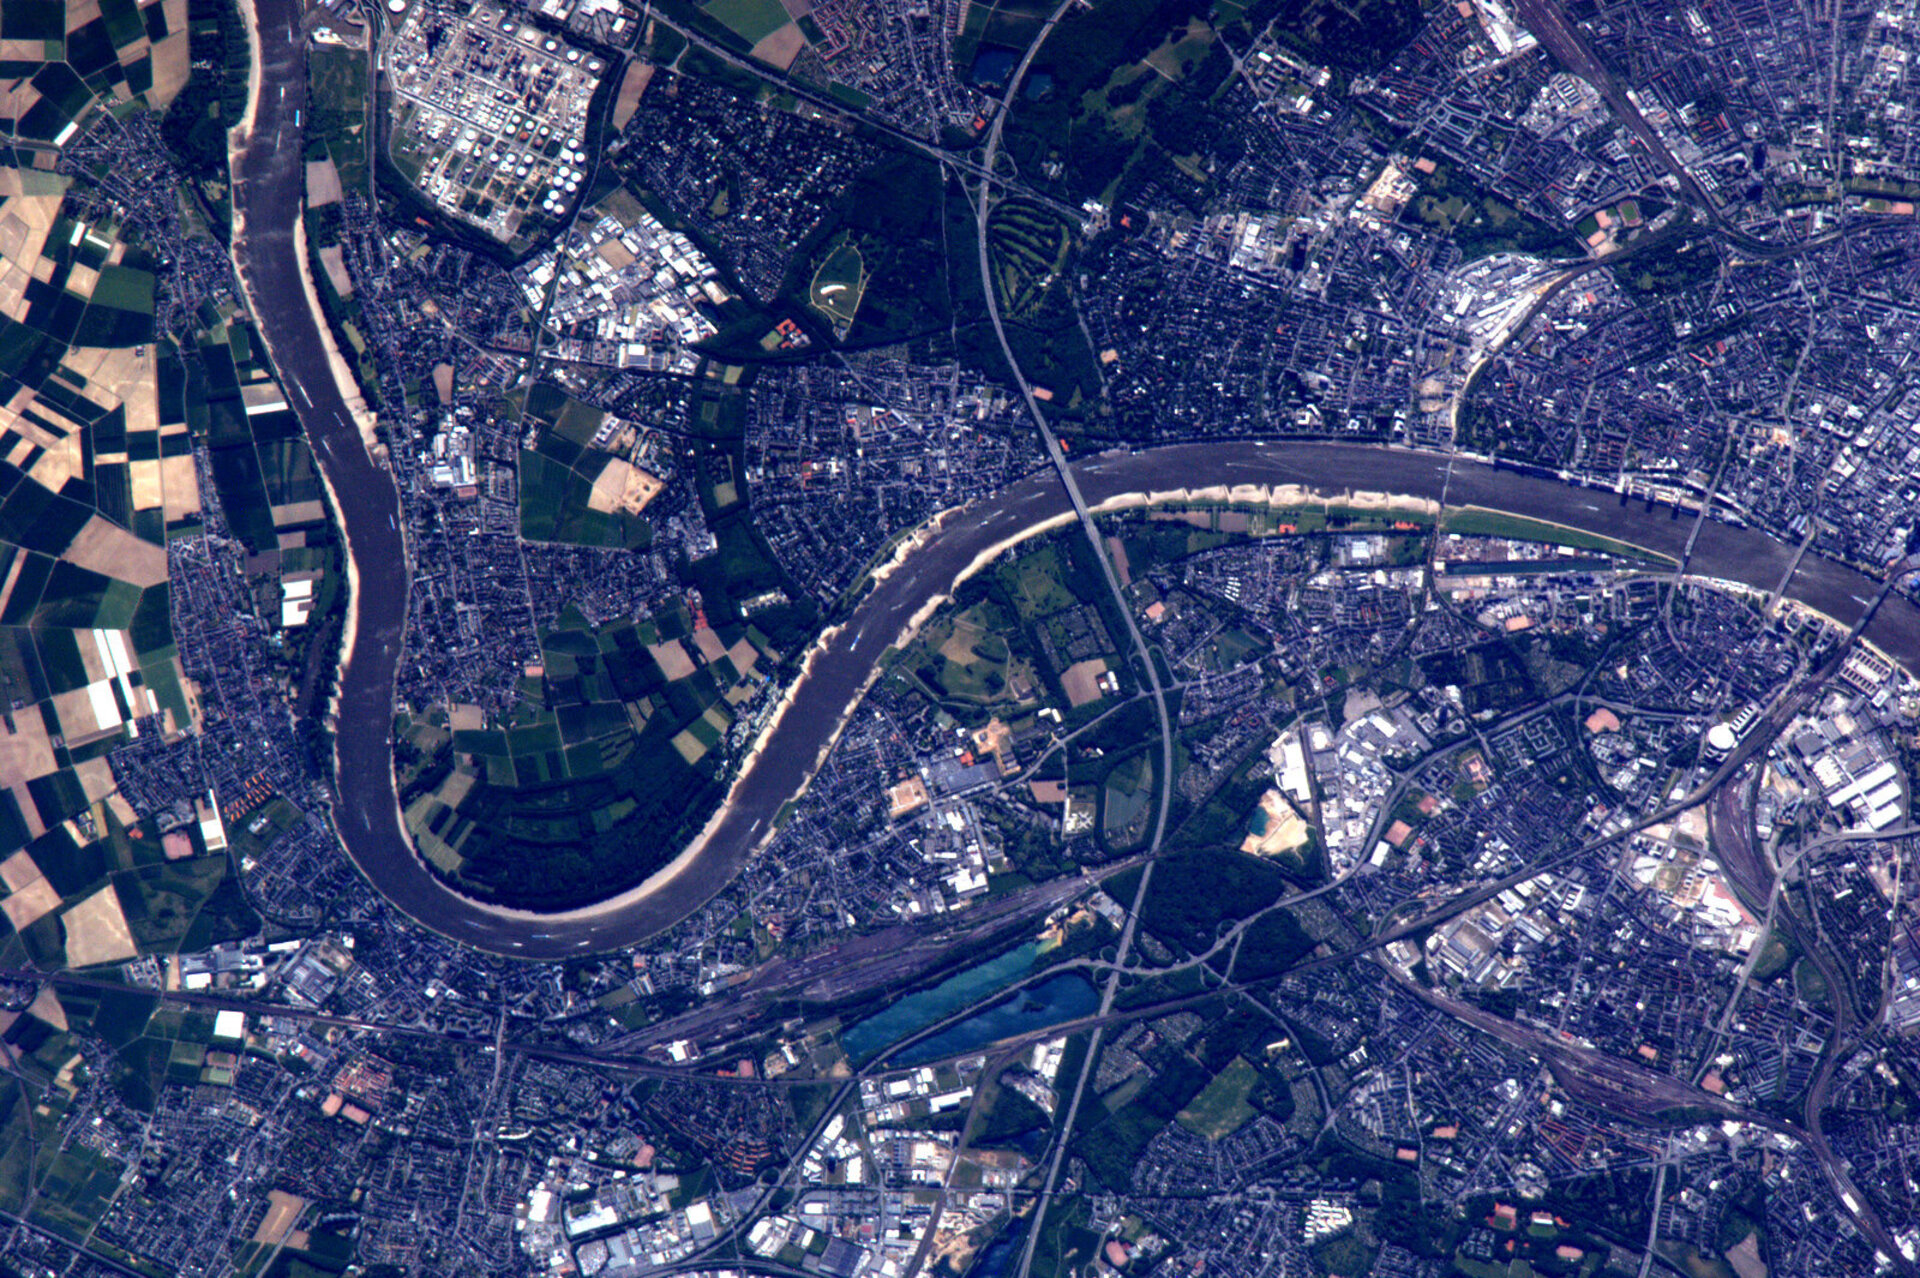 Cologne from ISS by Paolo Nespoli